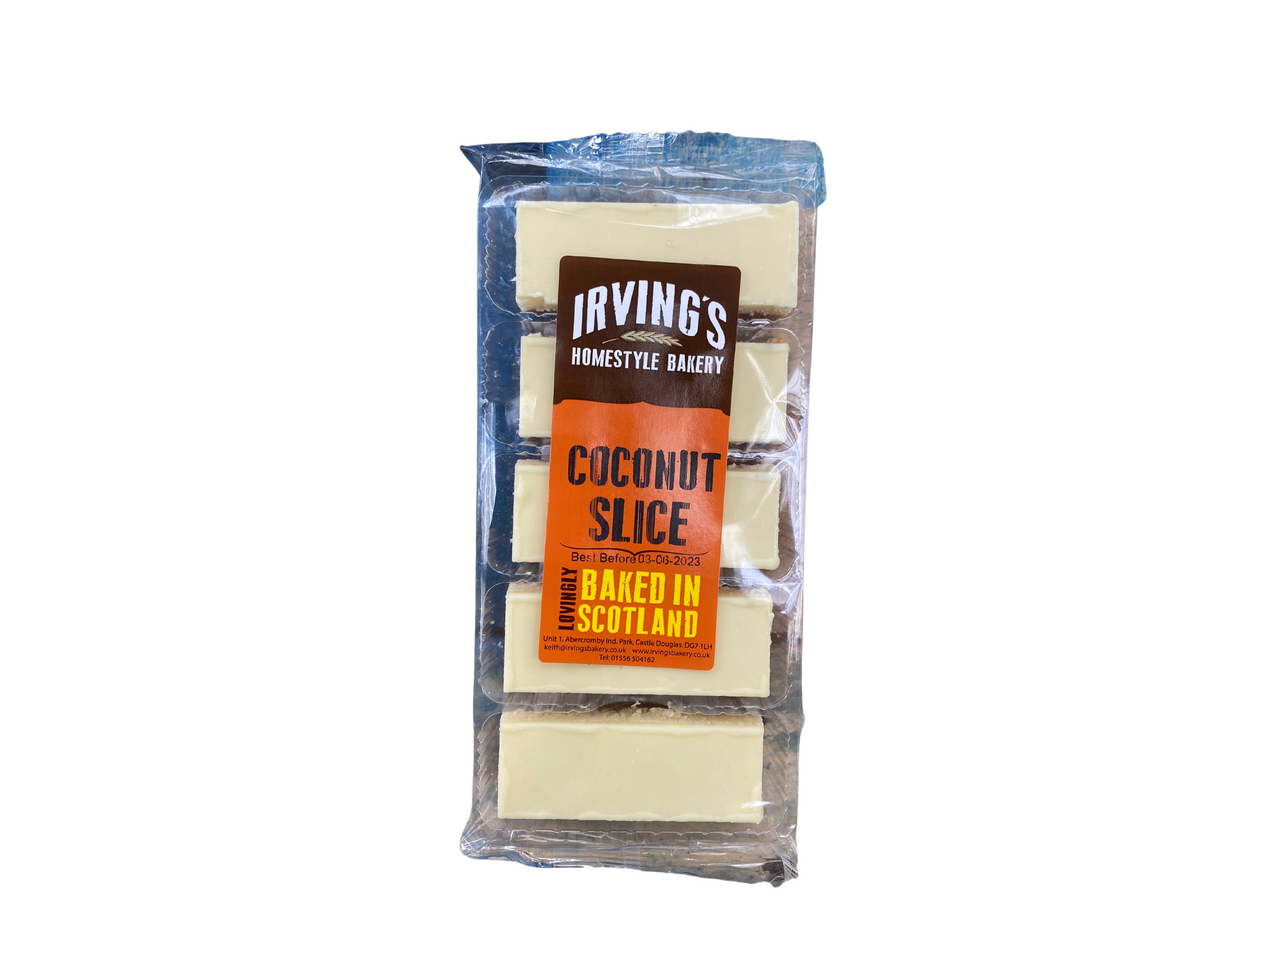 Irving's Homestyle Bakery Coconut Slices (May - July 23) RRP 2.25 CLEARANCE XL 89p or 2 for 1.50